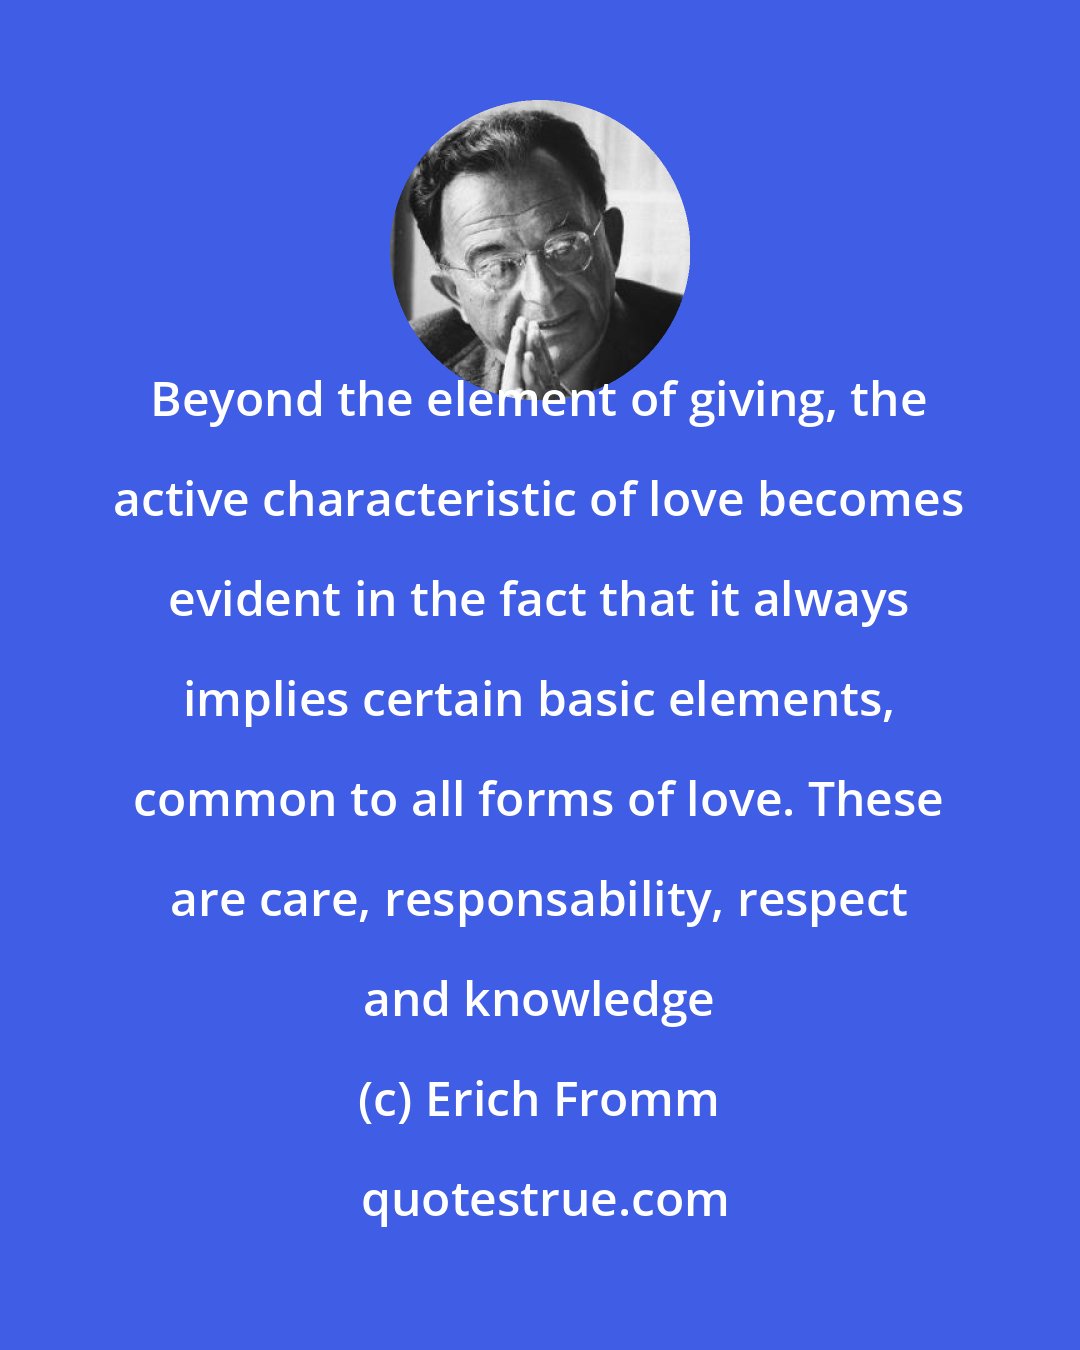 Erich Fromm: Beyond the element of giving, the active characteristic of love becomes evident in the fact that it always implies certain basic elements, common to all forms of love. These are care, responsability, respect and knowledge